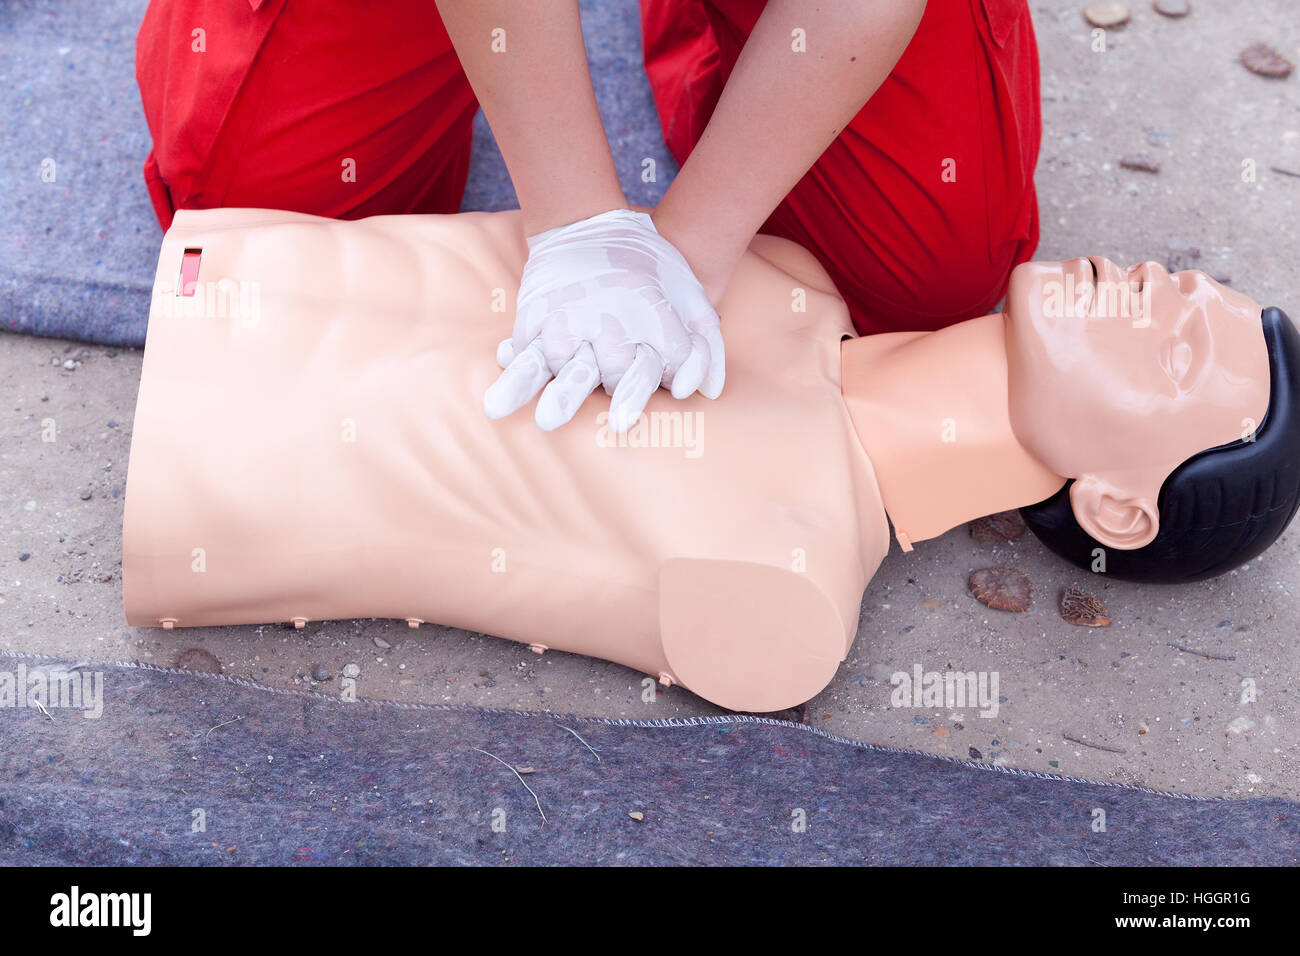 Rescuer practicing heart massage Stock Photo